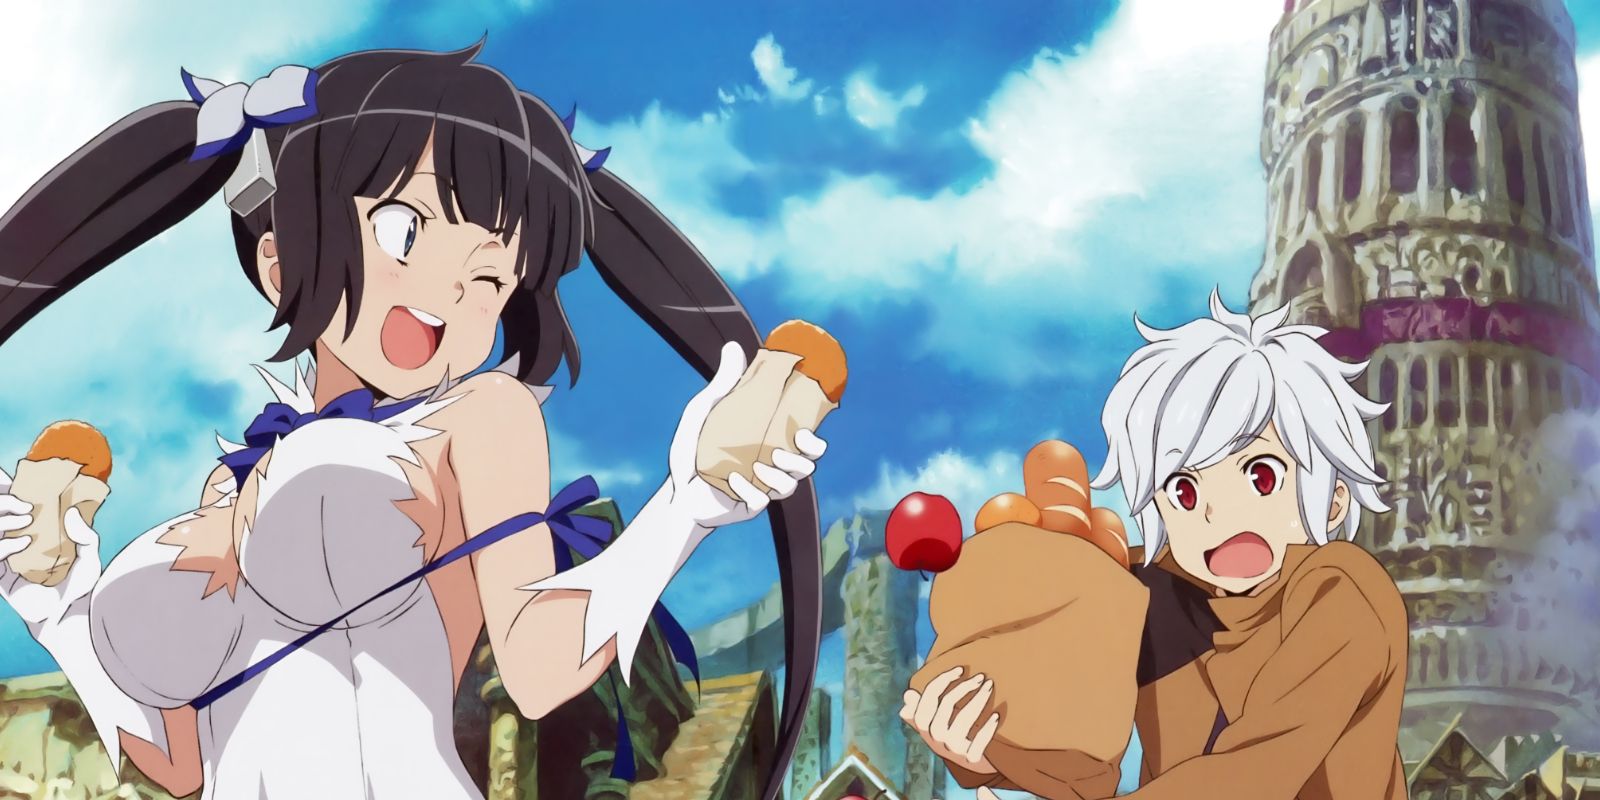 Hestia taunts Bell with groceries in Is It Wrong to Try to Pick Up Girls in a Dungeon?